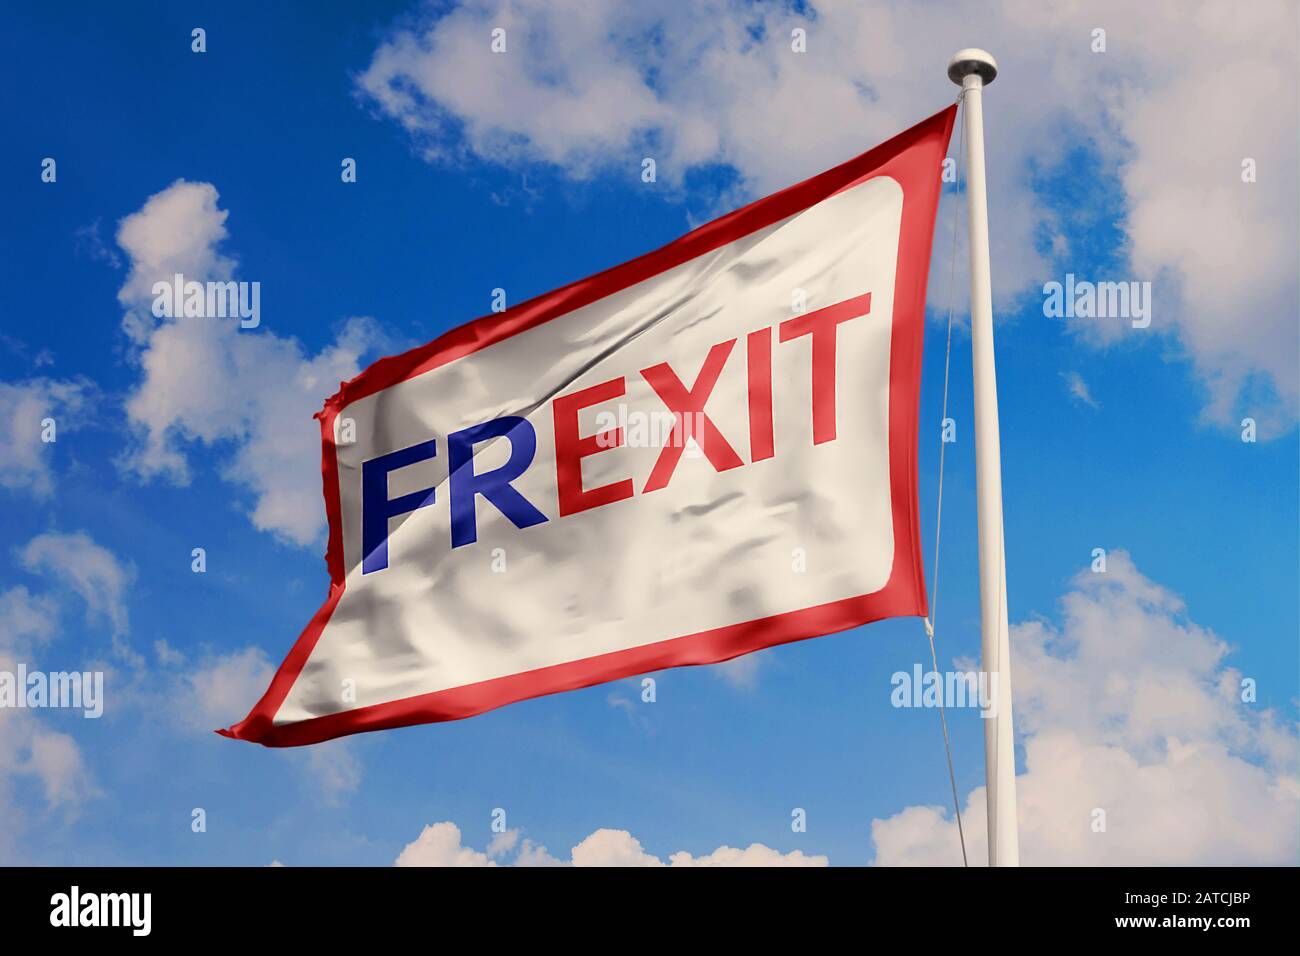 Frexit flag symbol of the hypothetical French withdrawal from the European Union Stock Photo